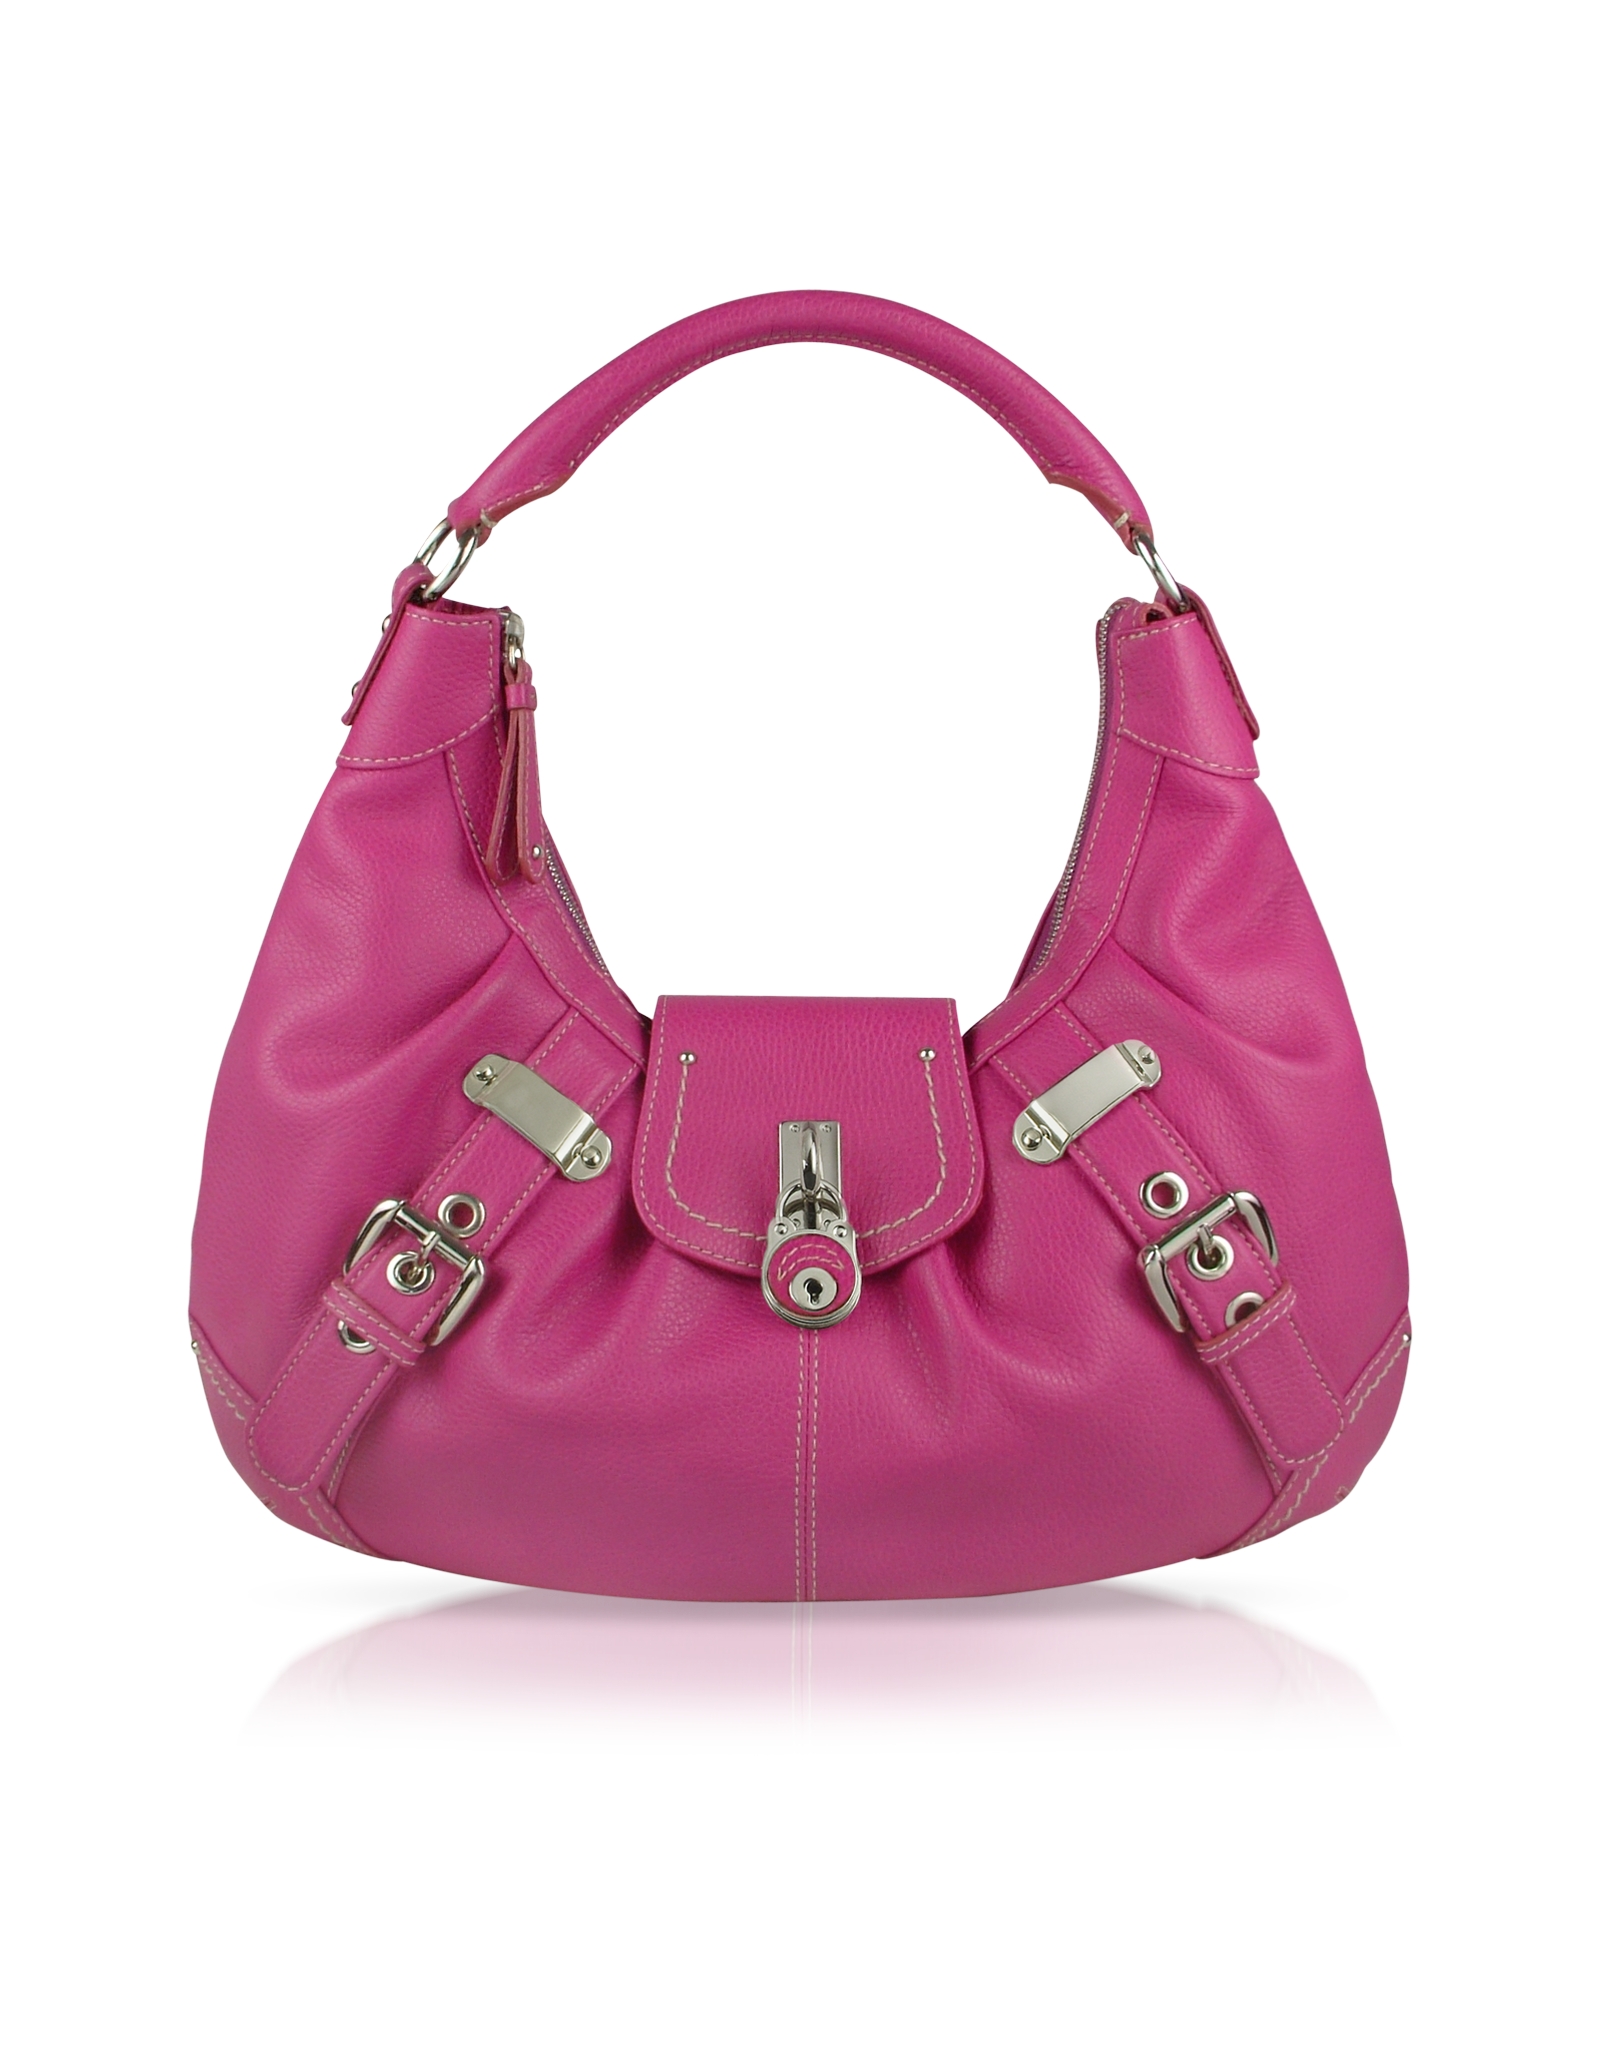 Buti Large Pebble Leather Hobo Bag in Pink (white) | Lyst